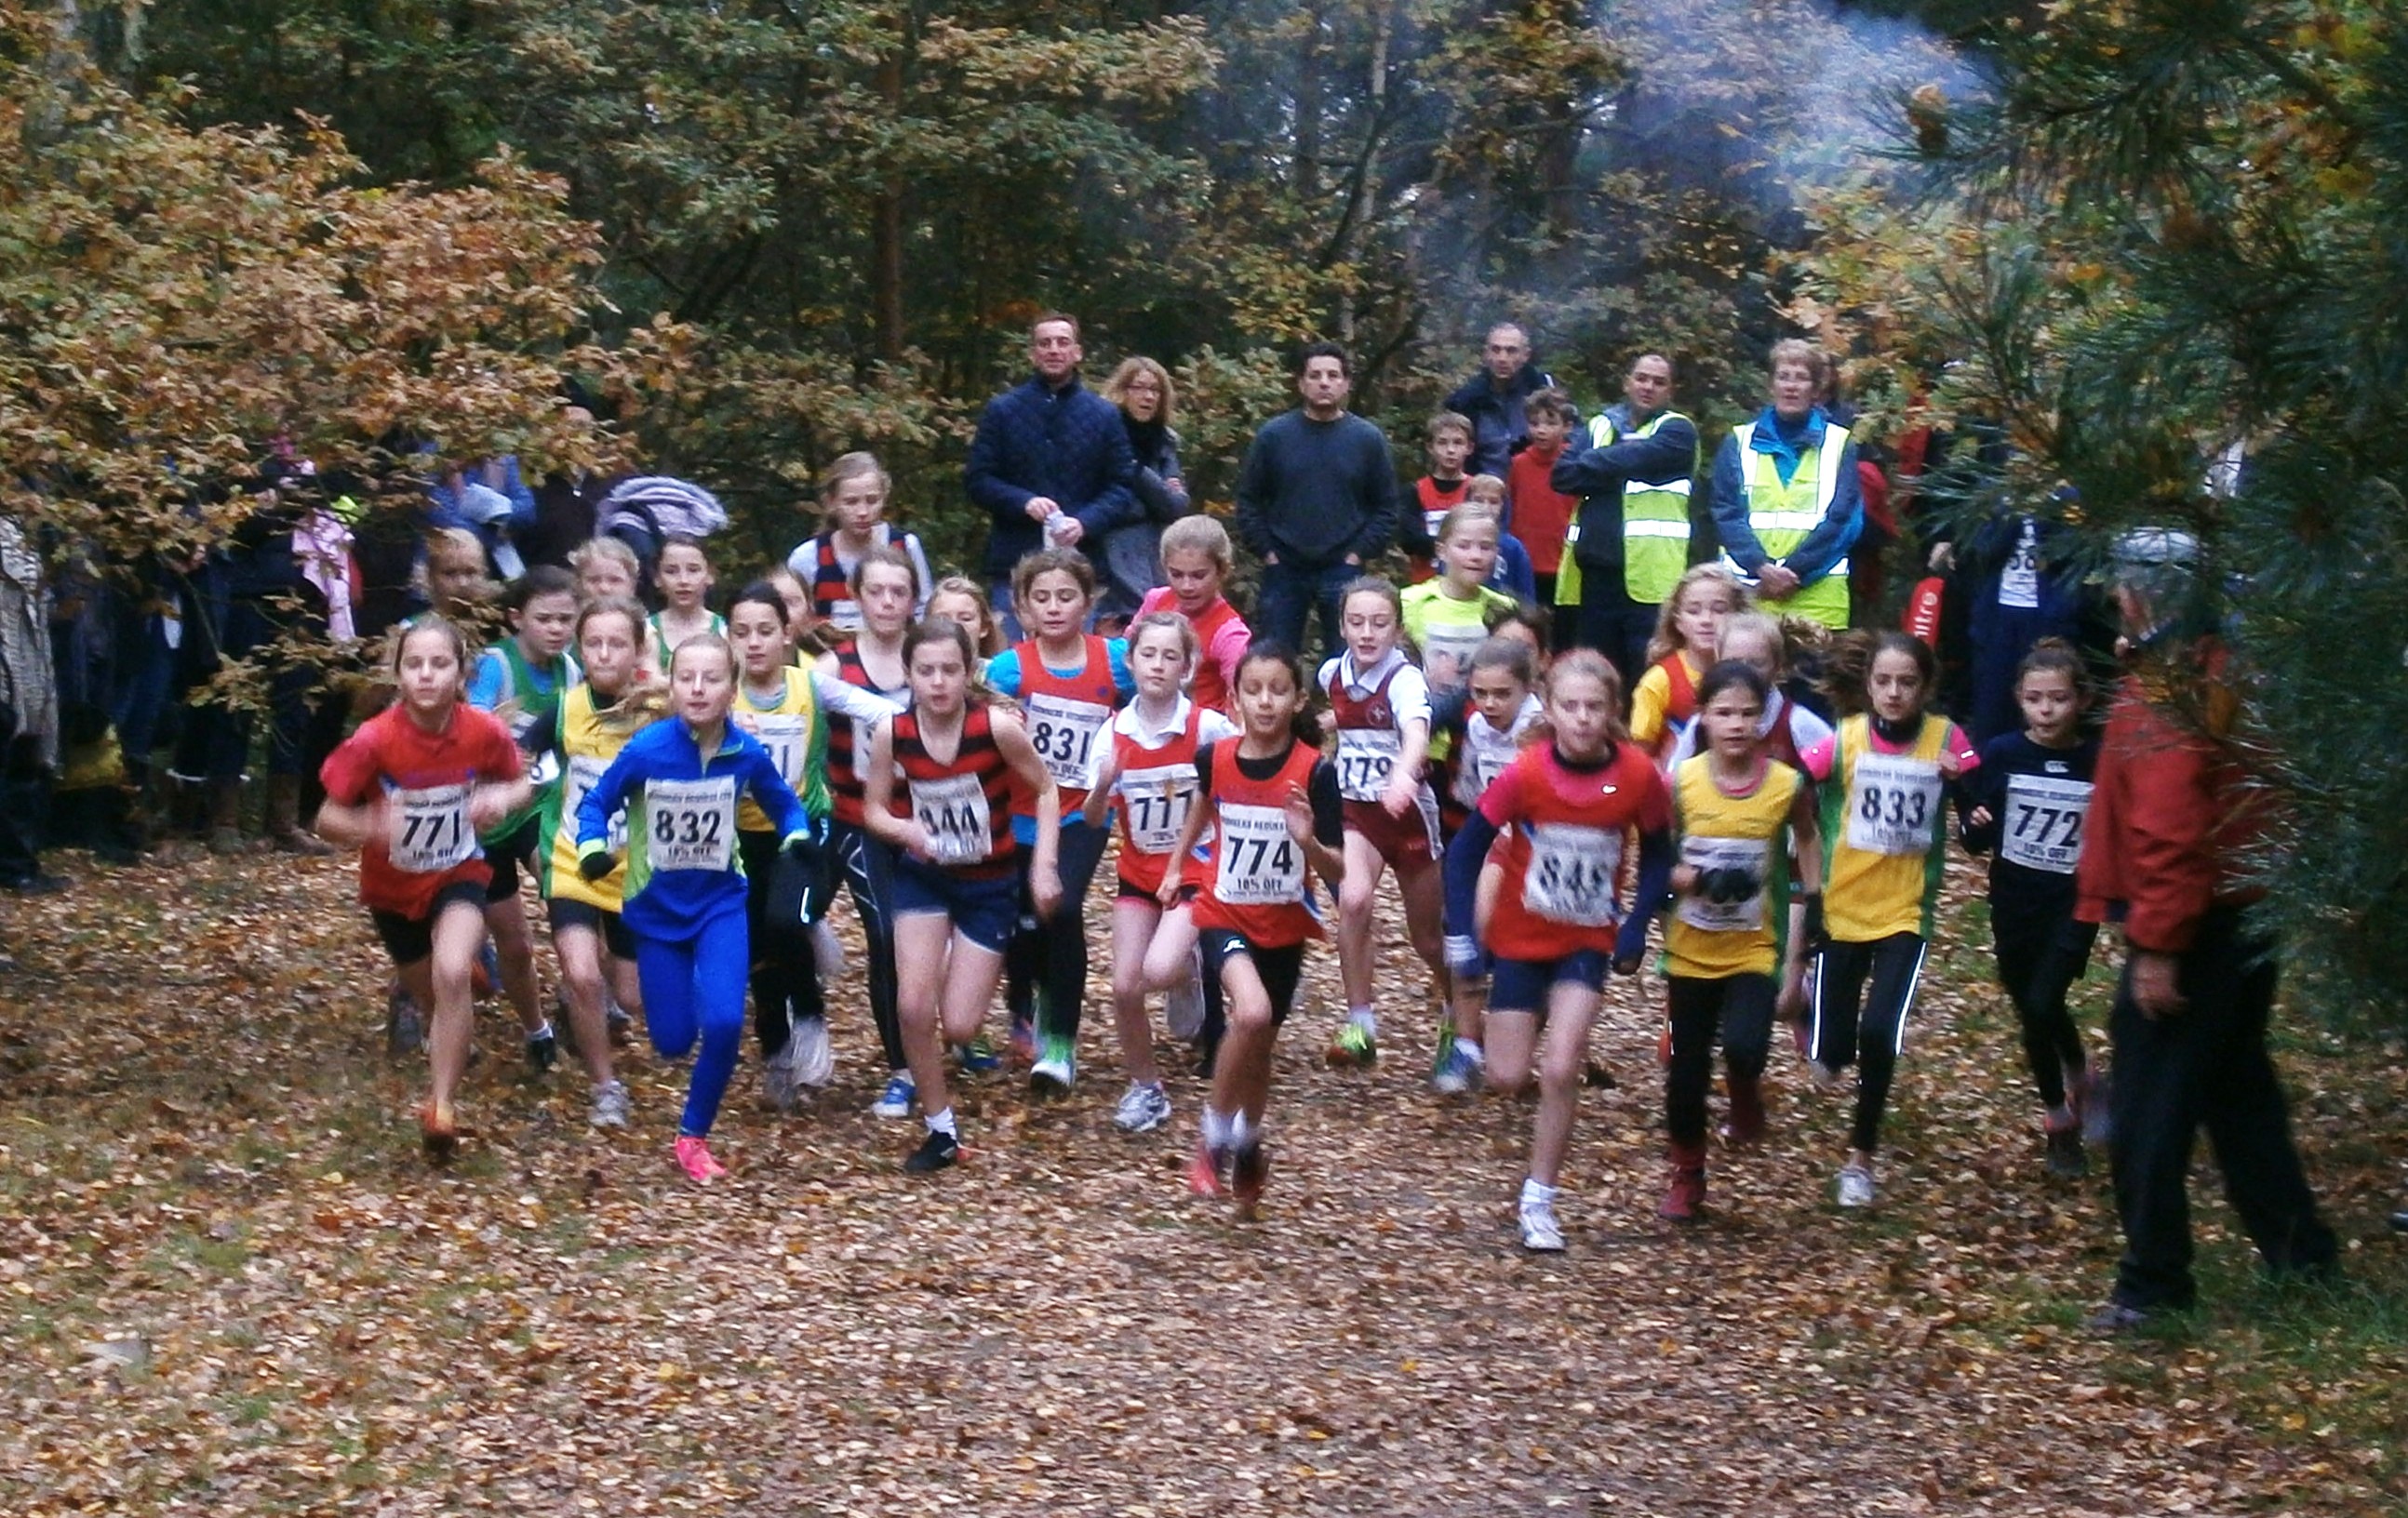 Race Report: Camberley AC Cross Country Event UK 17th November 2013